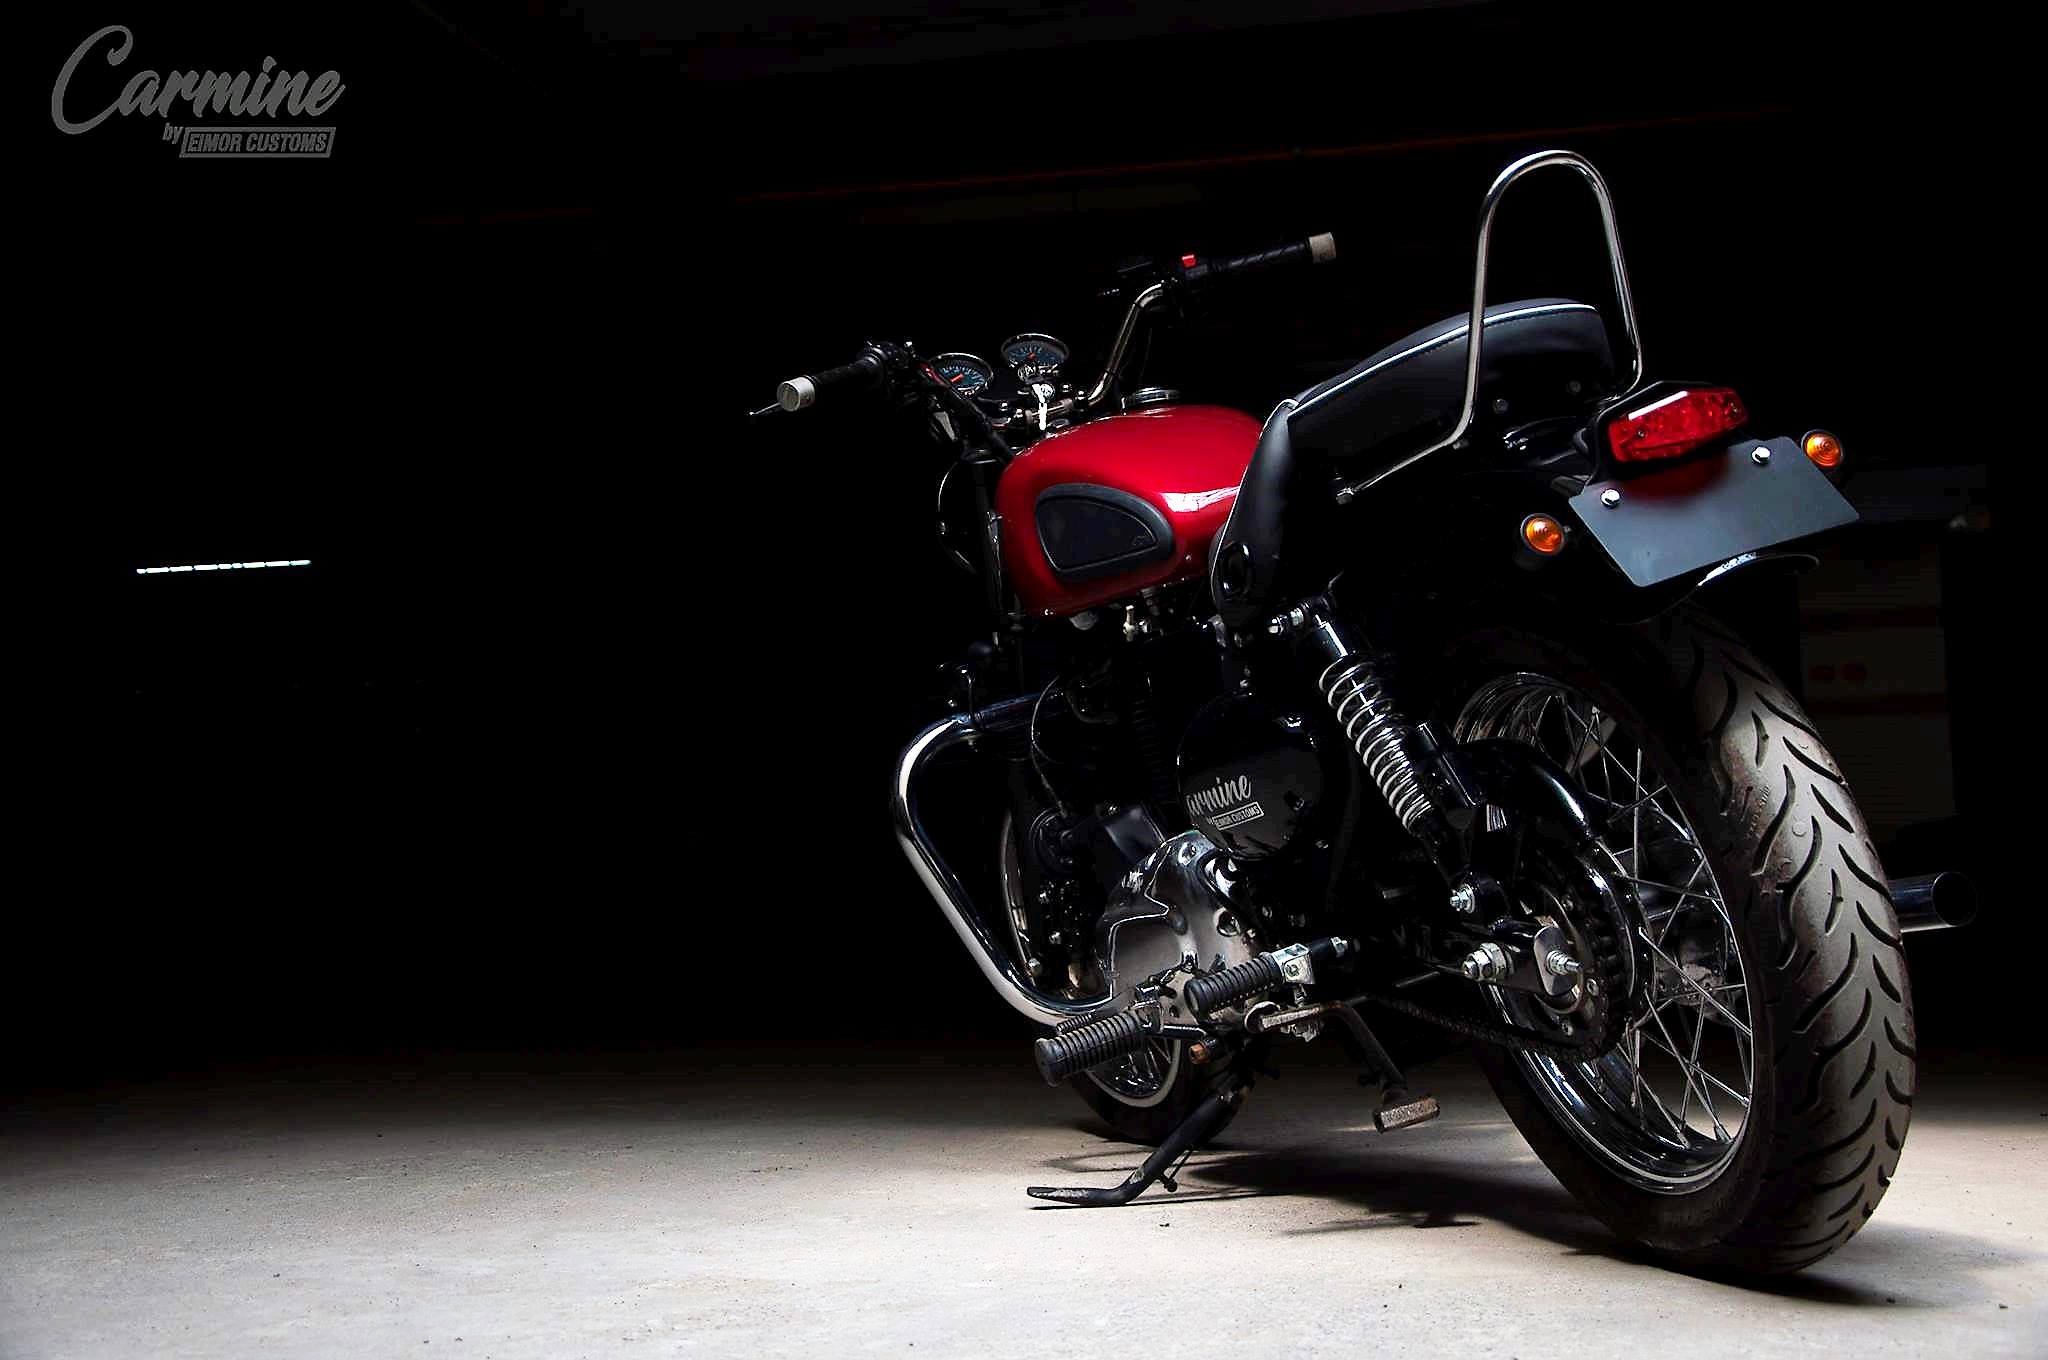 Meet Royal Enfield Carmine 350 Equipped with Premium Parts - photograph